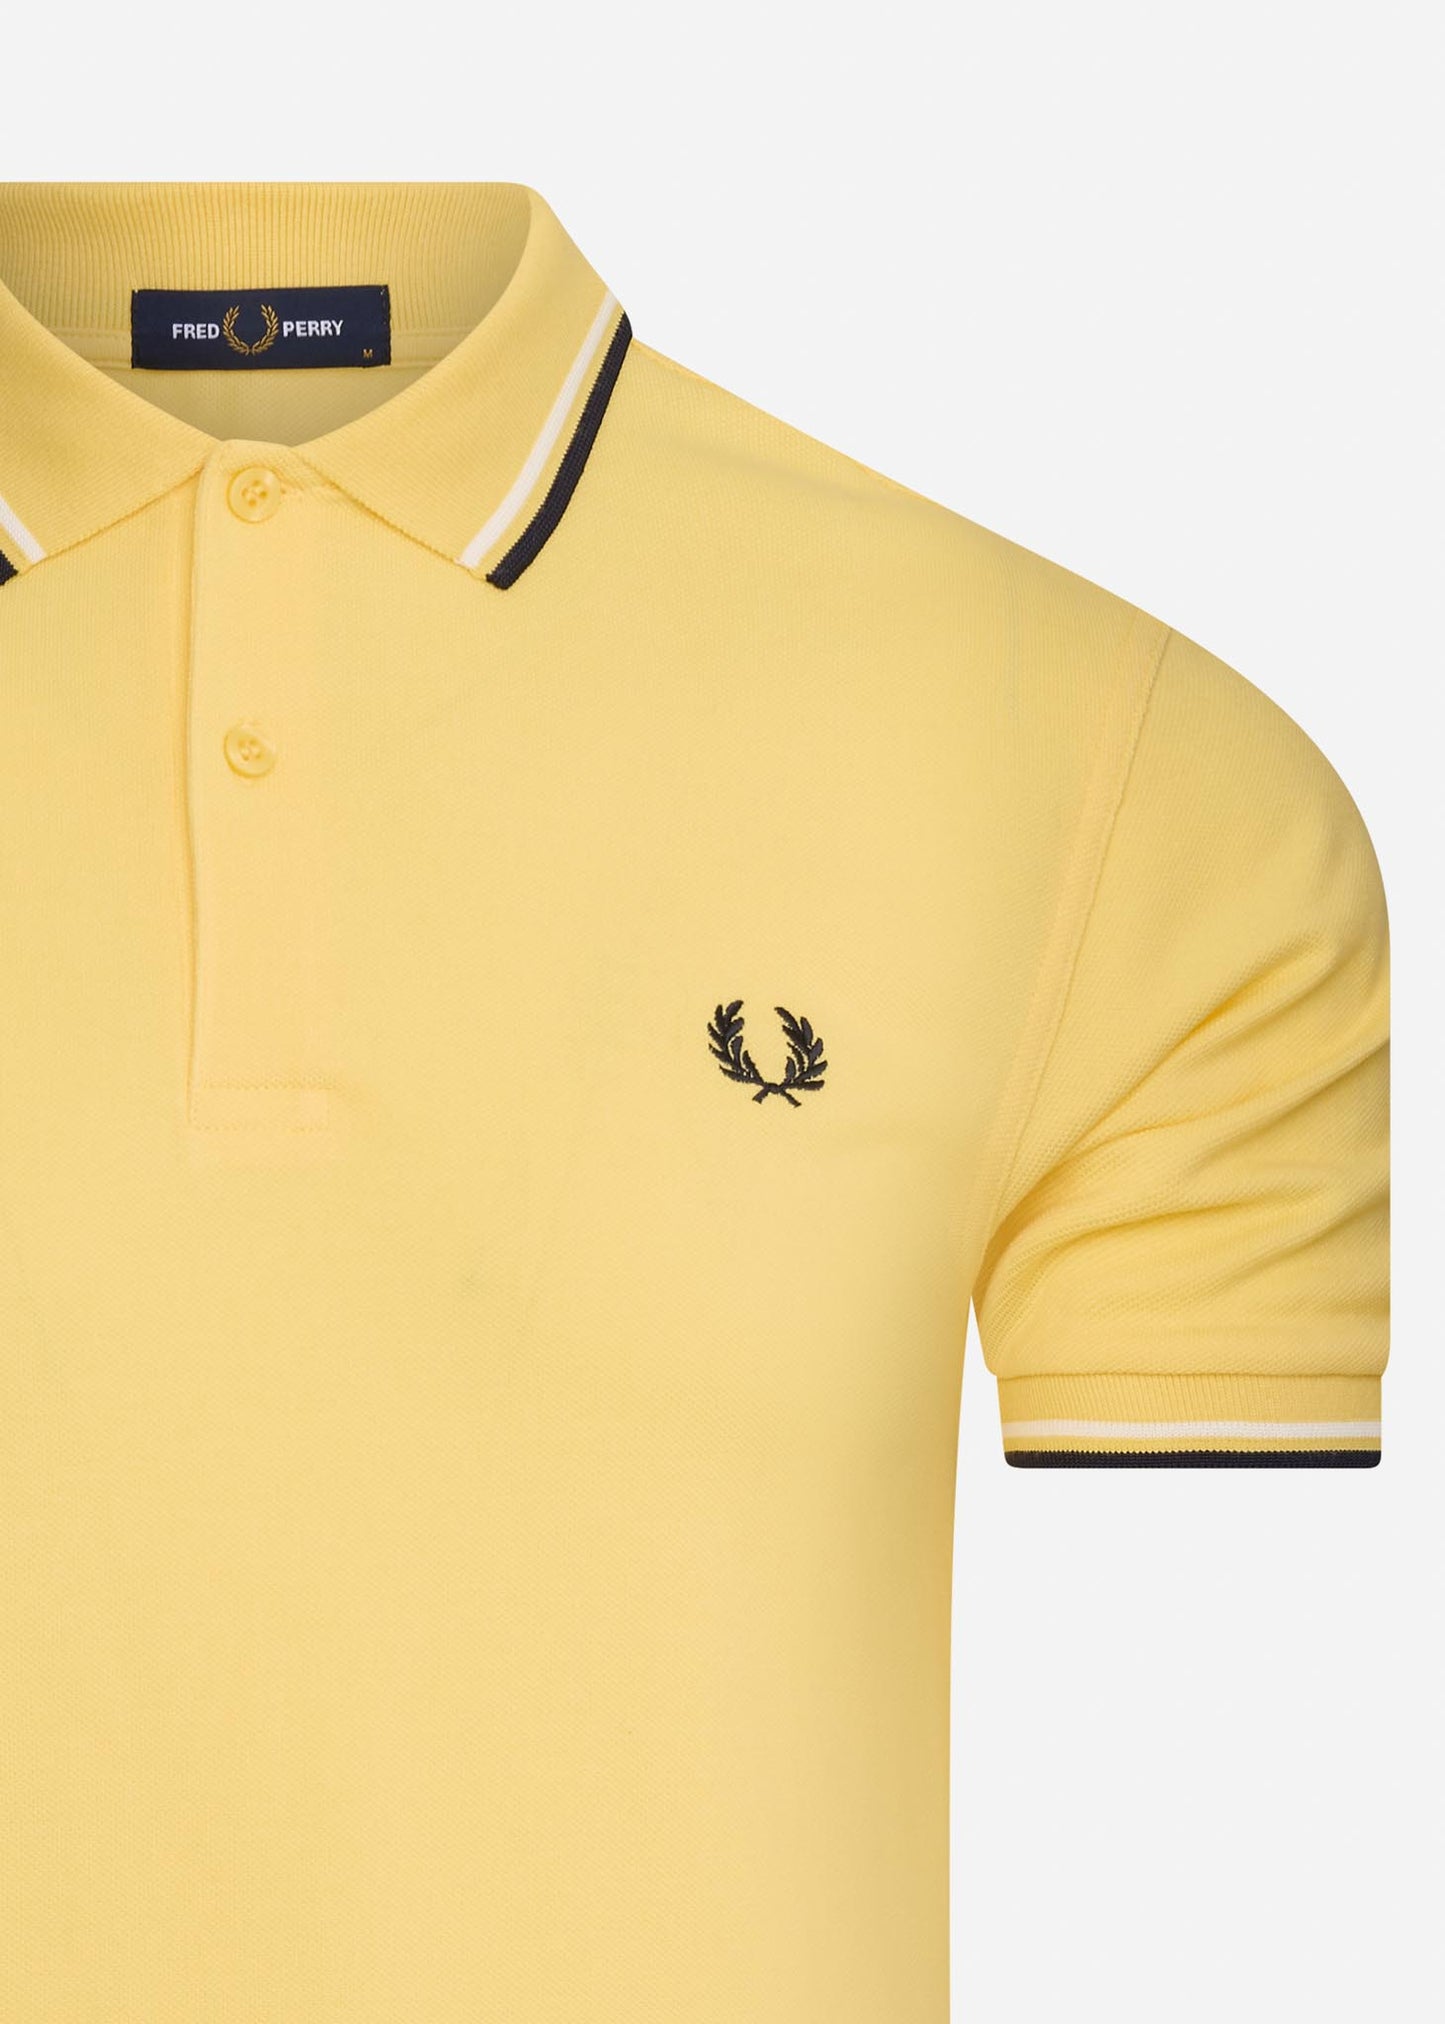 Twin tipped fred perry shirt - 1964 yellow snow white navy